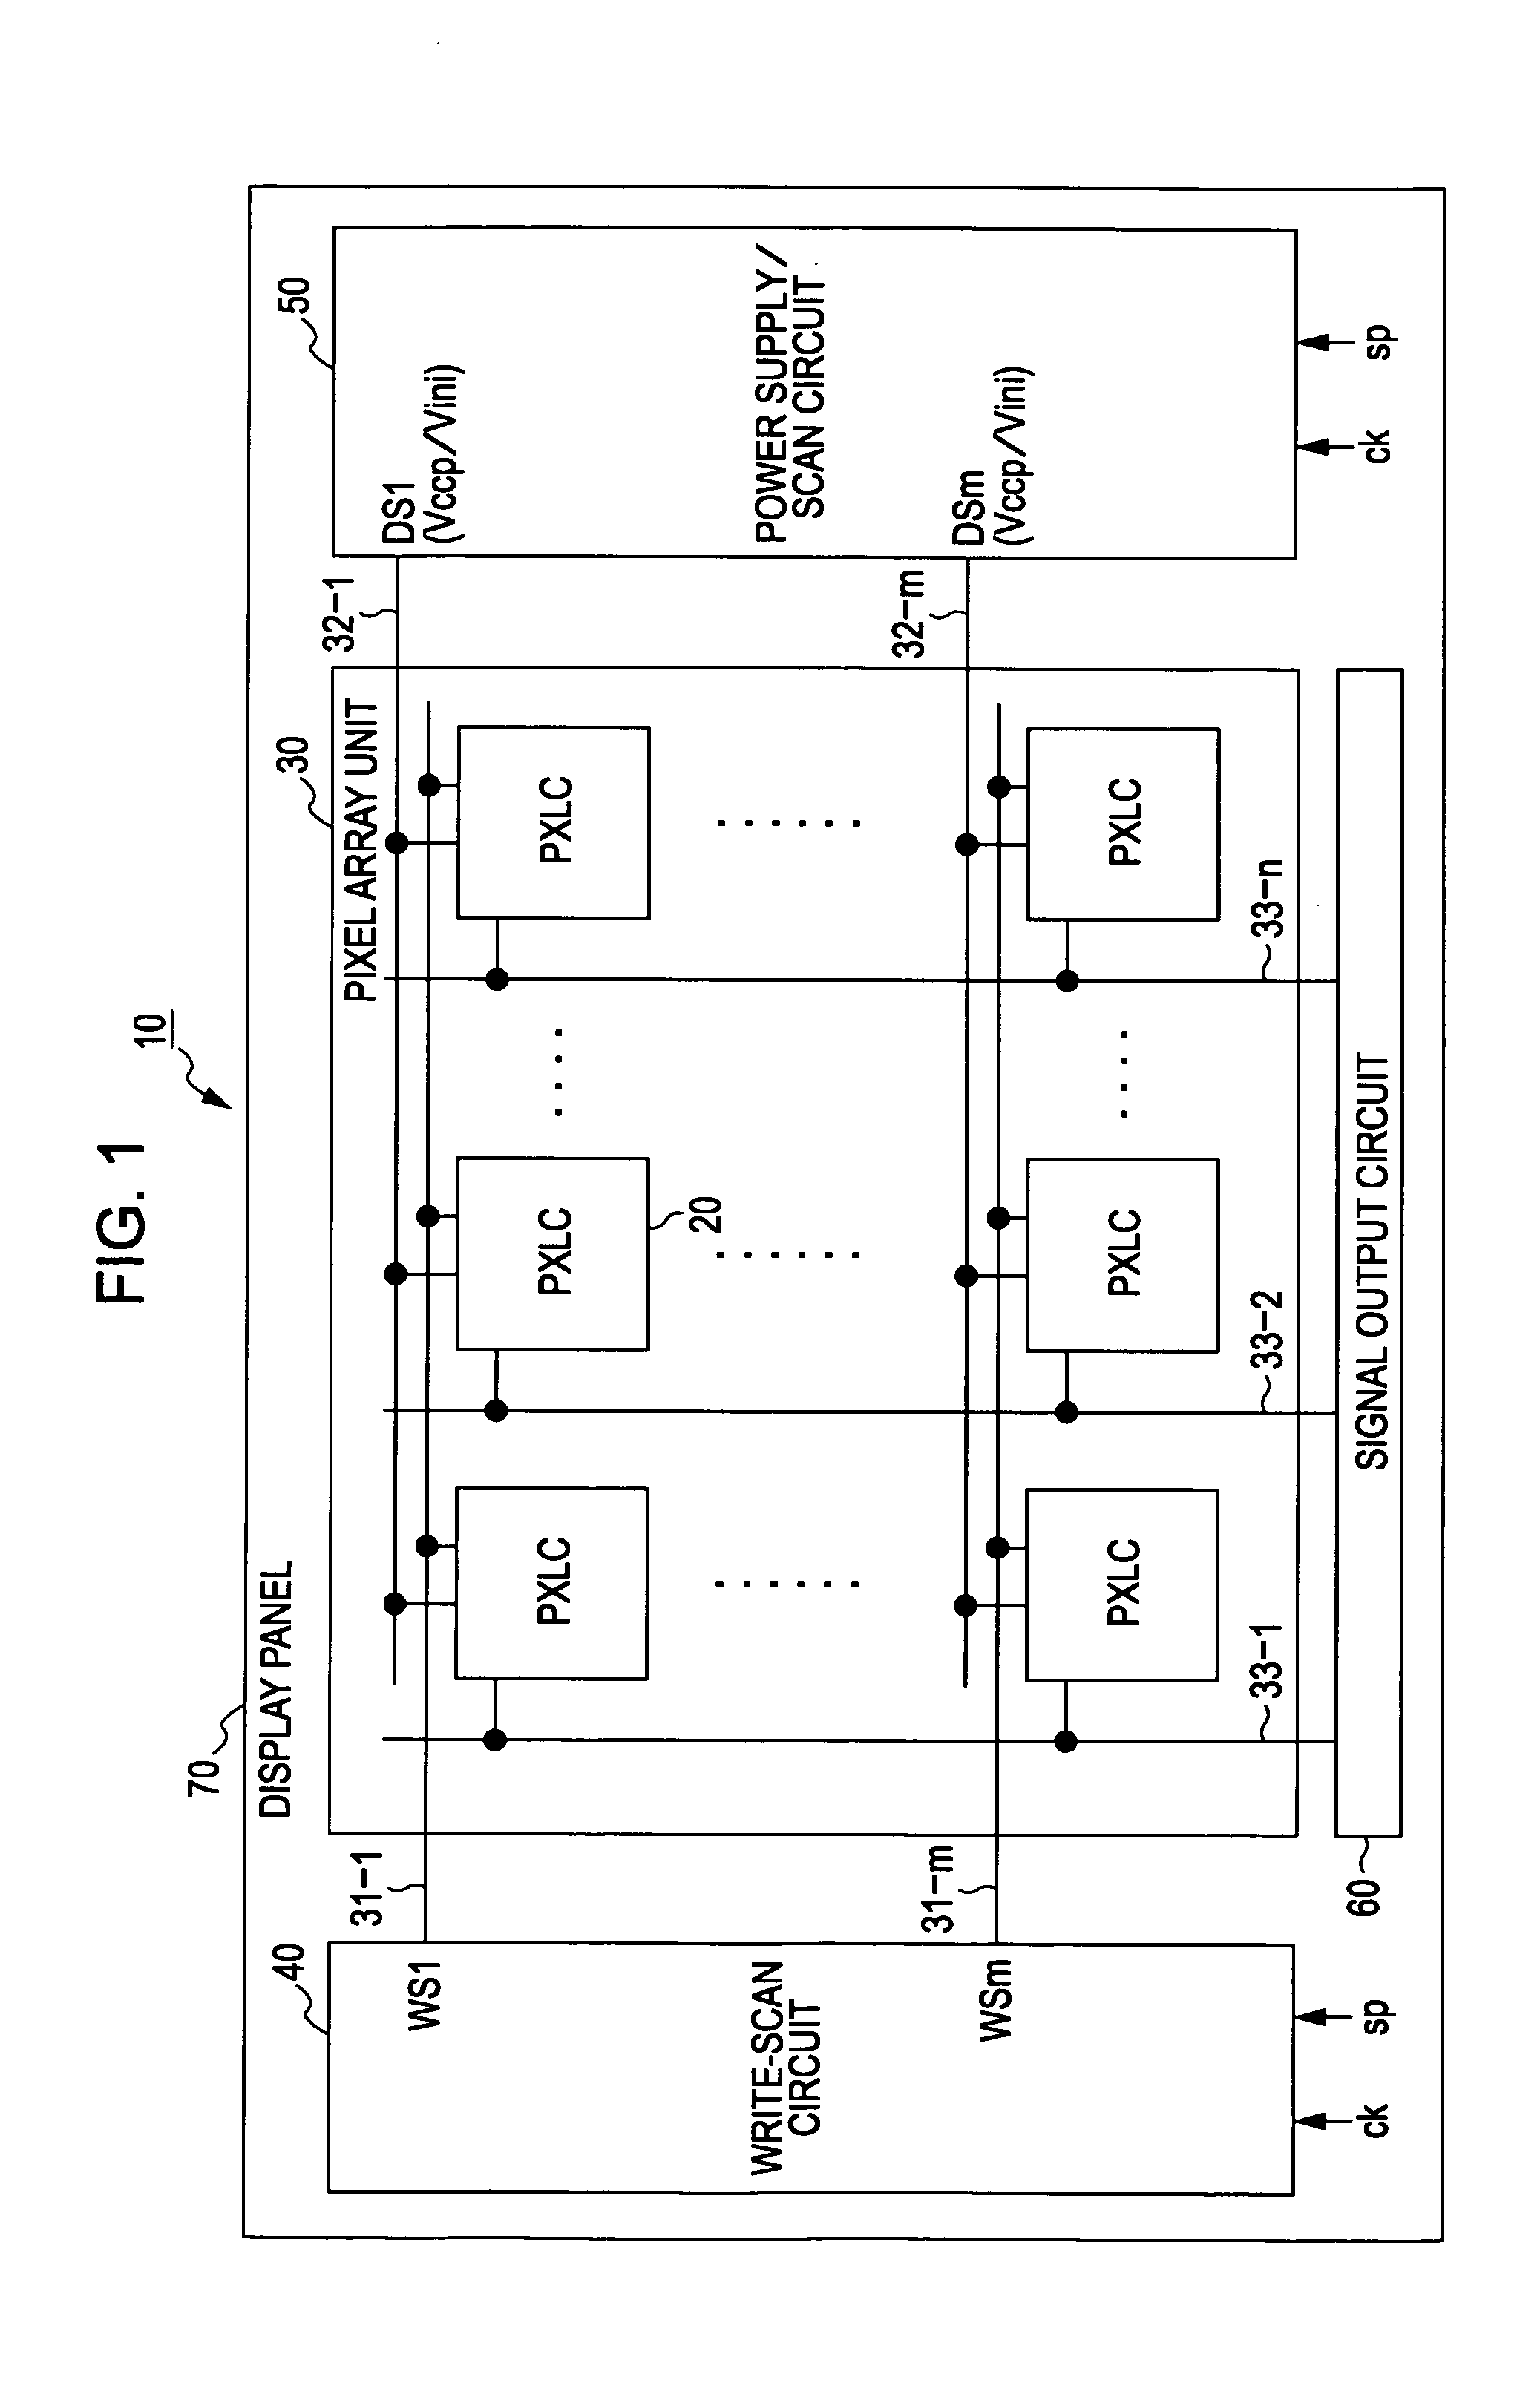 Display device, driving method for display device, and electronic apparatus